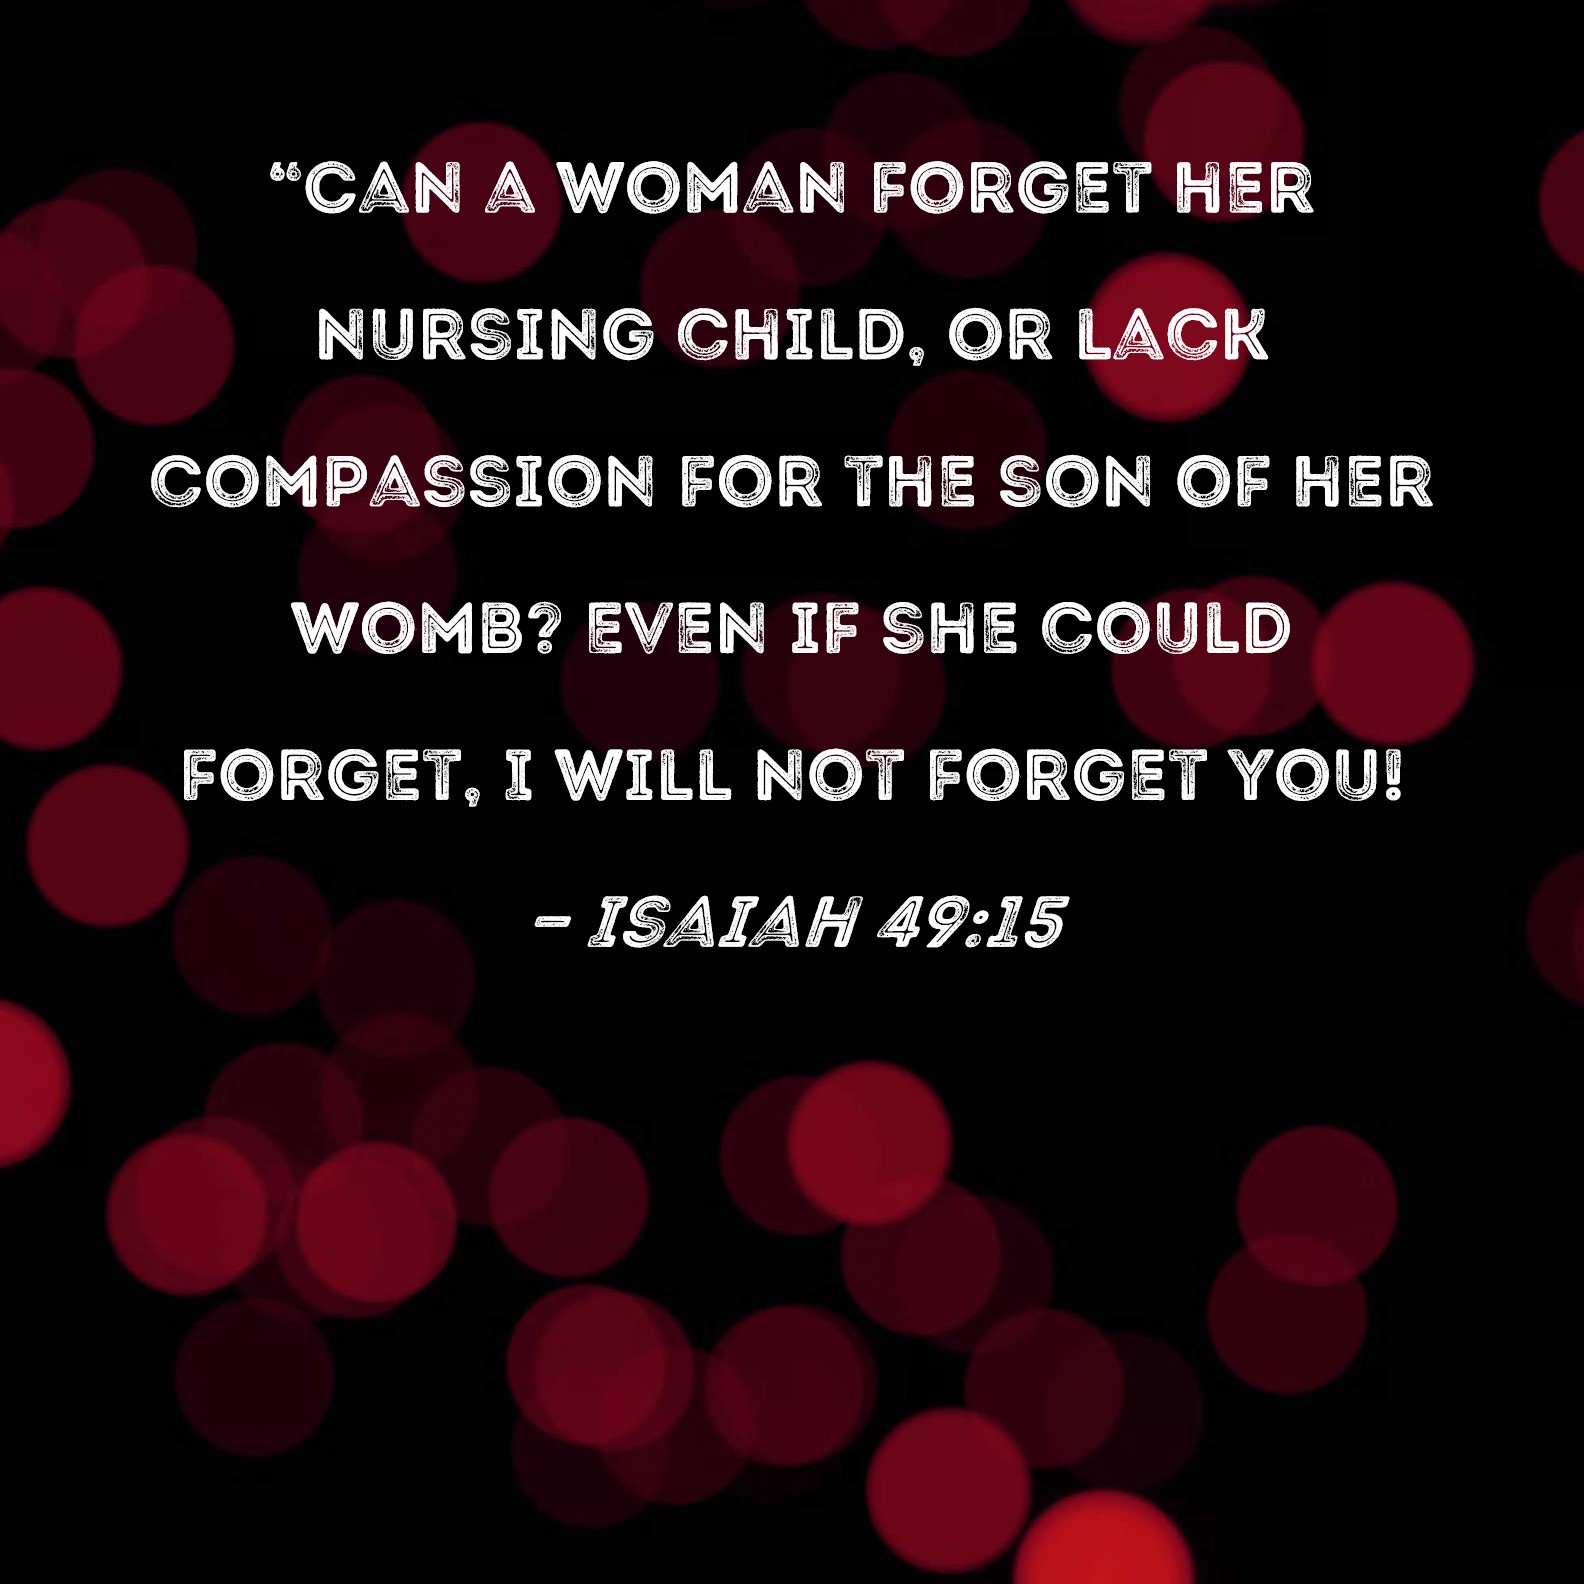 isaiah-49-15-can-a-woman-forget-her-nursing-child-or-lack-compassion